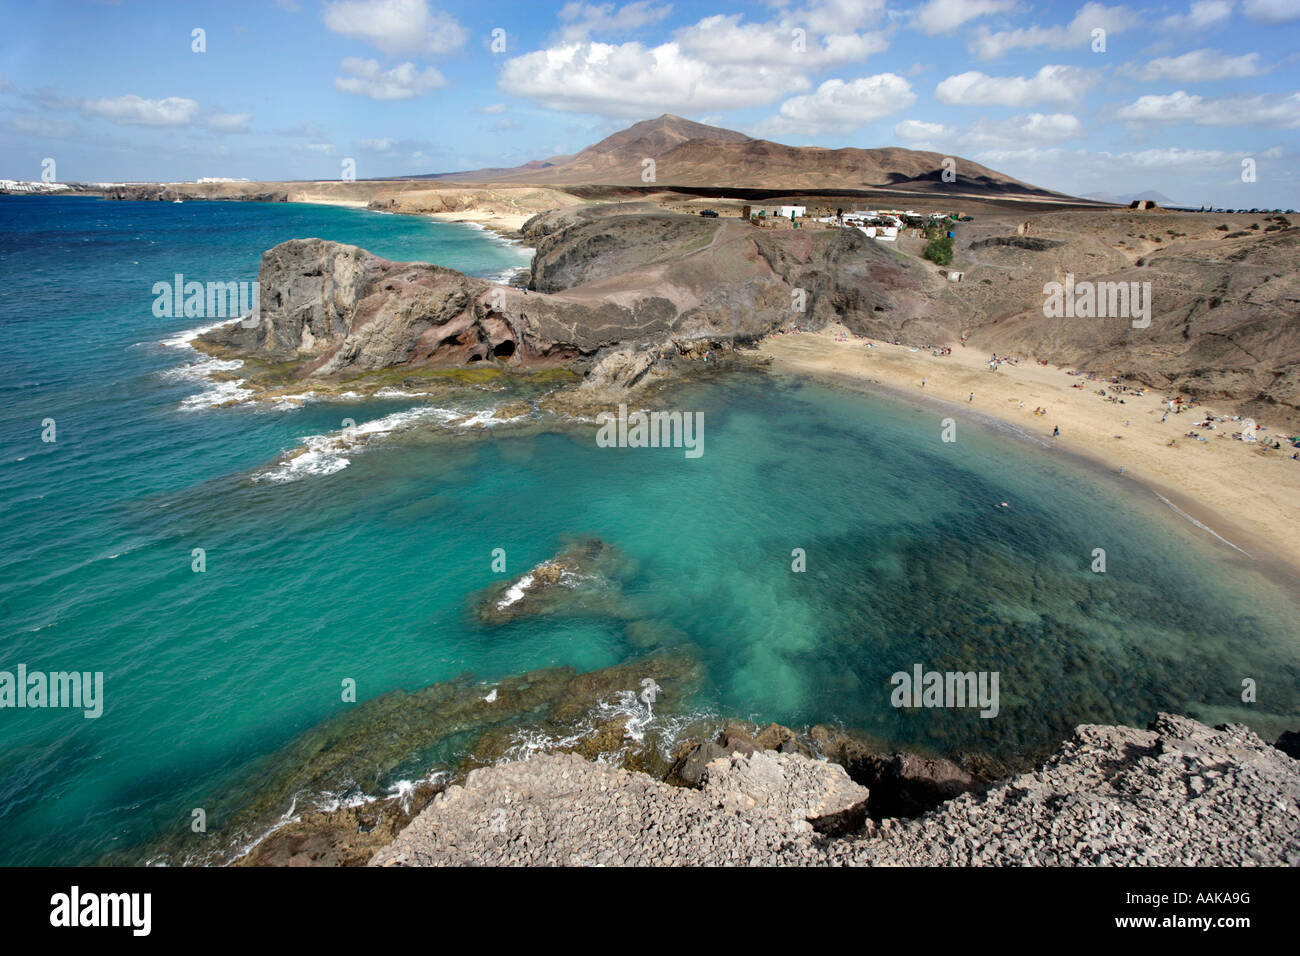 Playa Papagayo beach on the southern end of Lanzarote an island of the Canaries Playa Mujeres is visible in the background Stock Photo